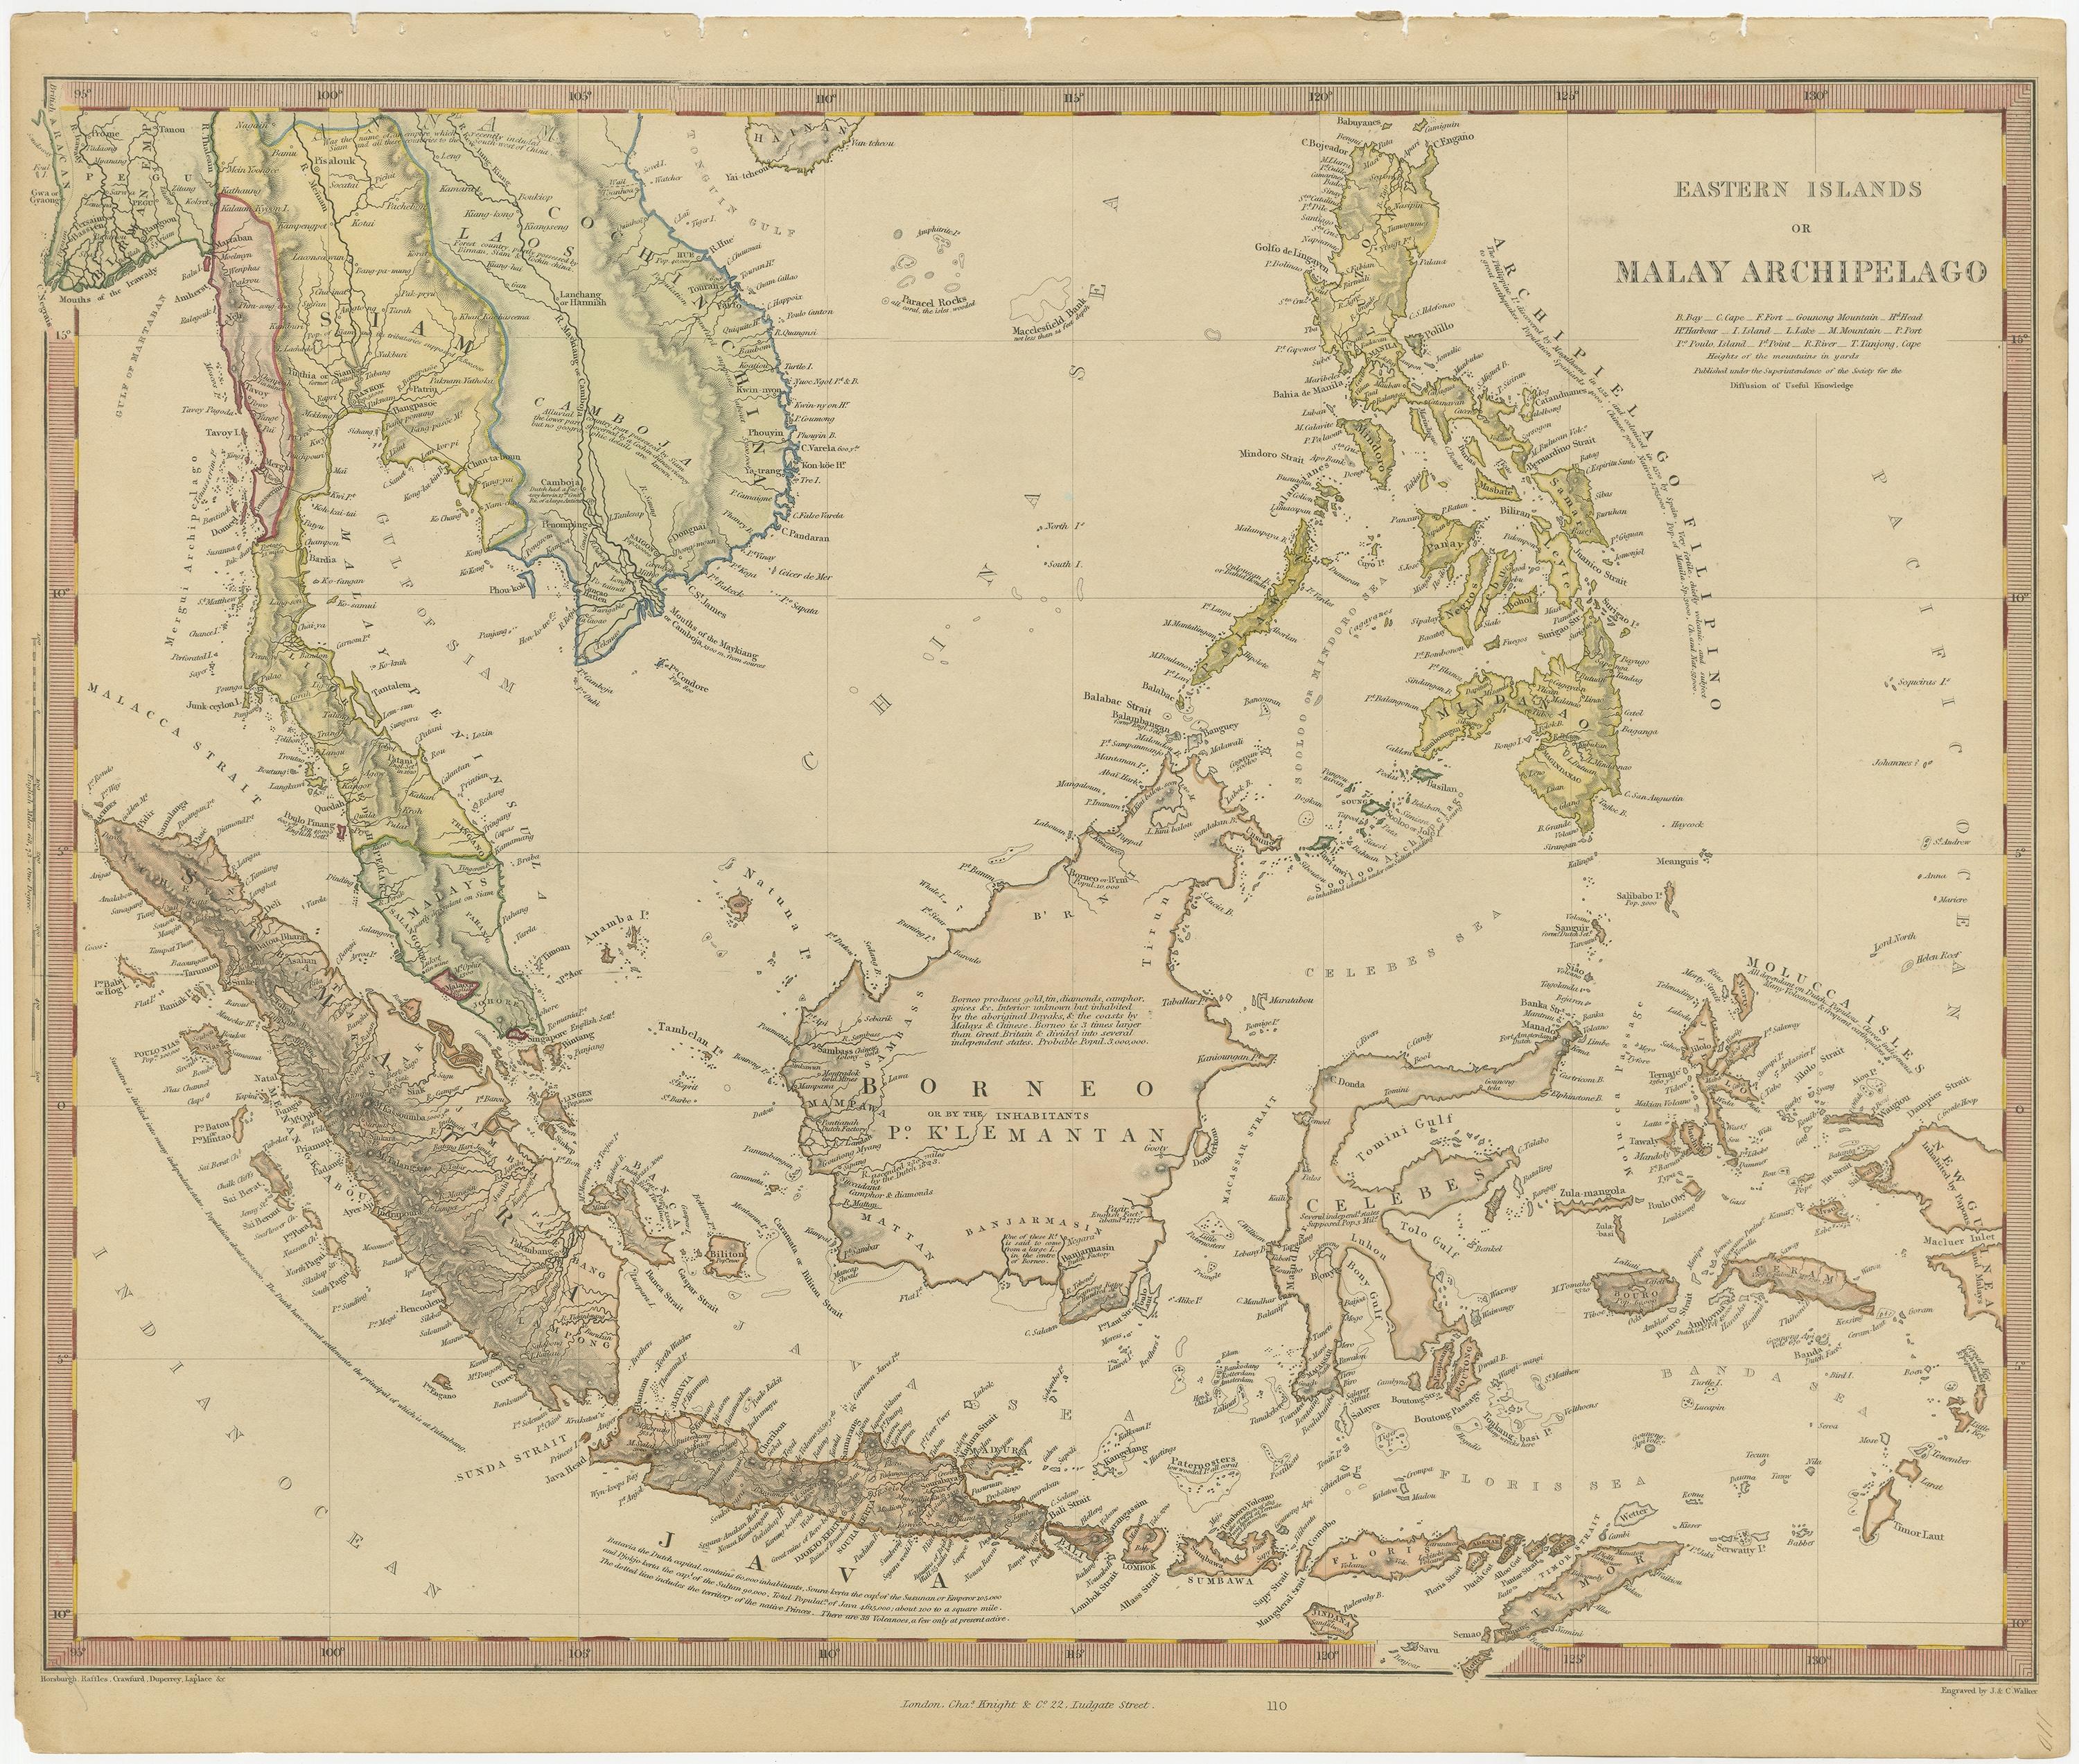 Original antique map of the East Indies including Borneo, Celebes, Java, Sumatra and surrounding islands. Published circa 1840. 

Artists and Engravers: Engraved by J. & C. Walker. 

Condition: Good, general age-related toning. Minor wear, blank